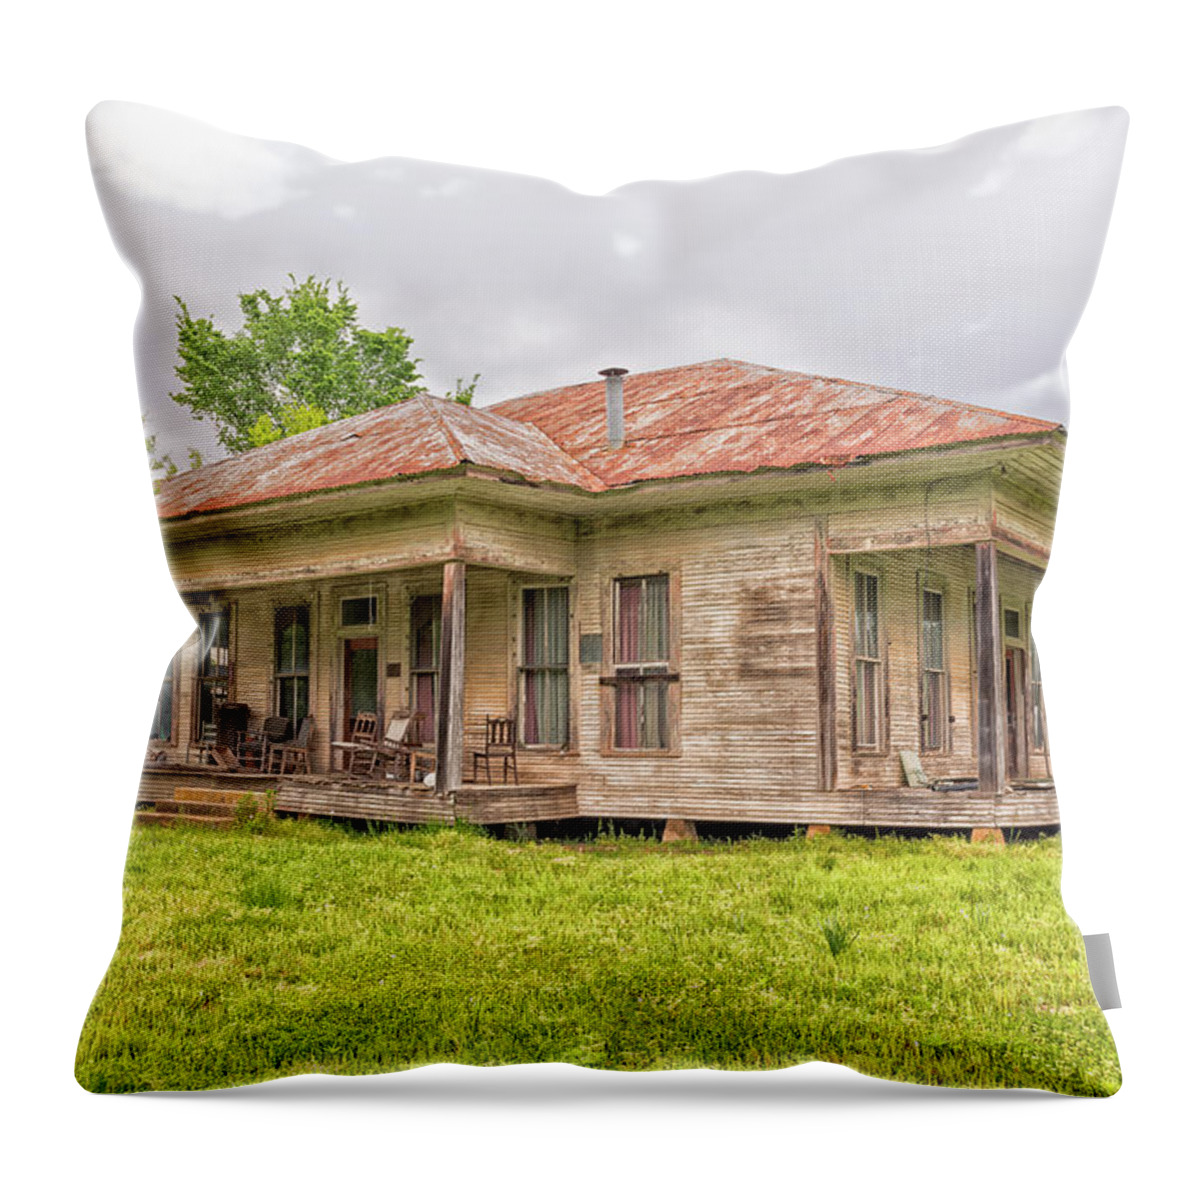 Arkansas Back Road Throw Pillow featuring the photograph Arkansas Roadside House by Victor Culpepper